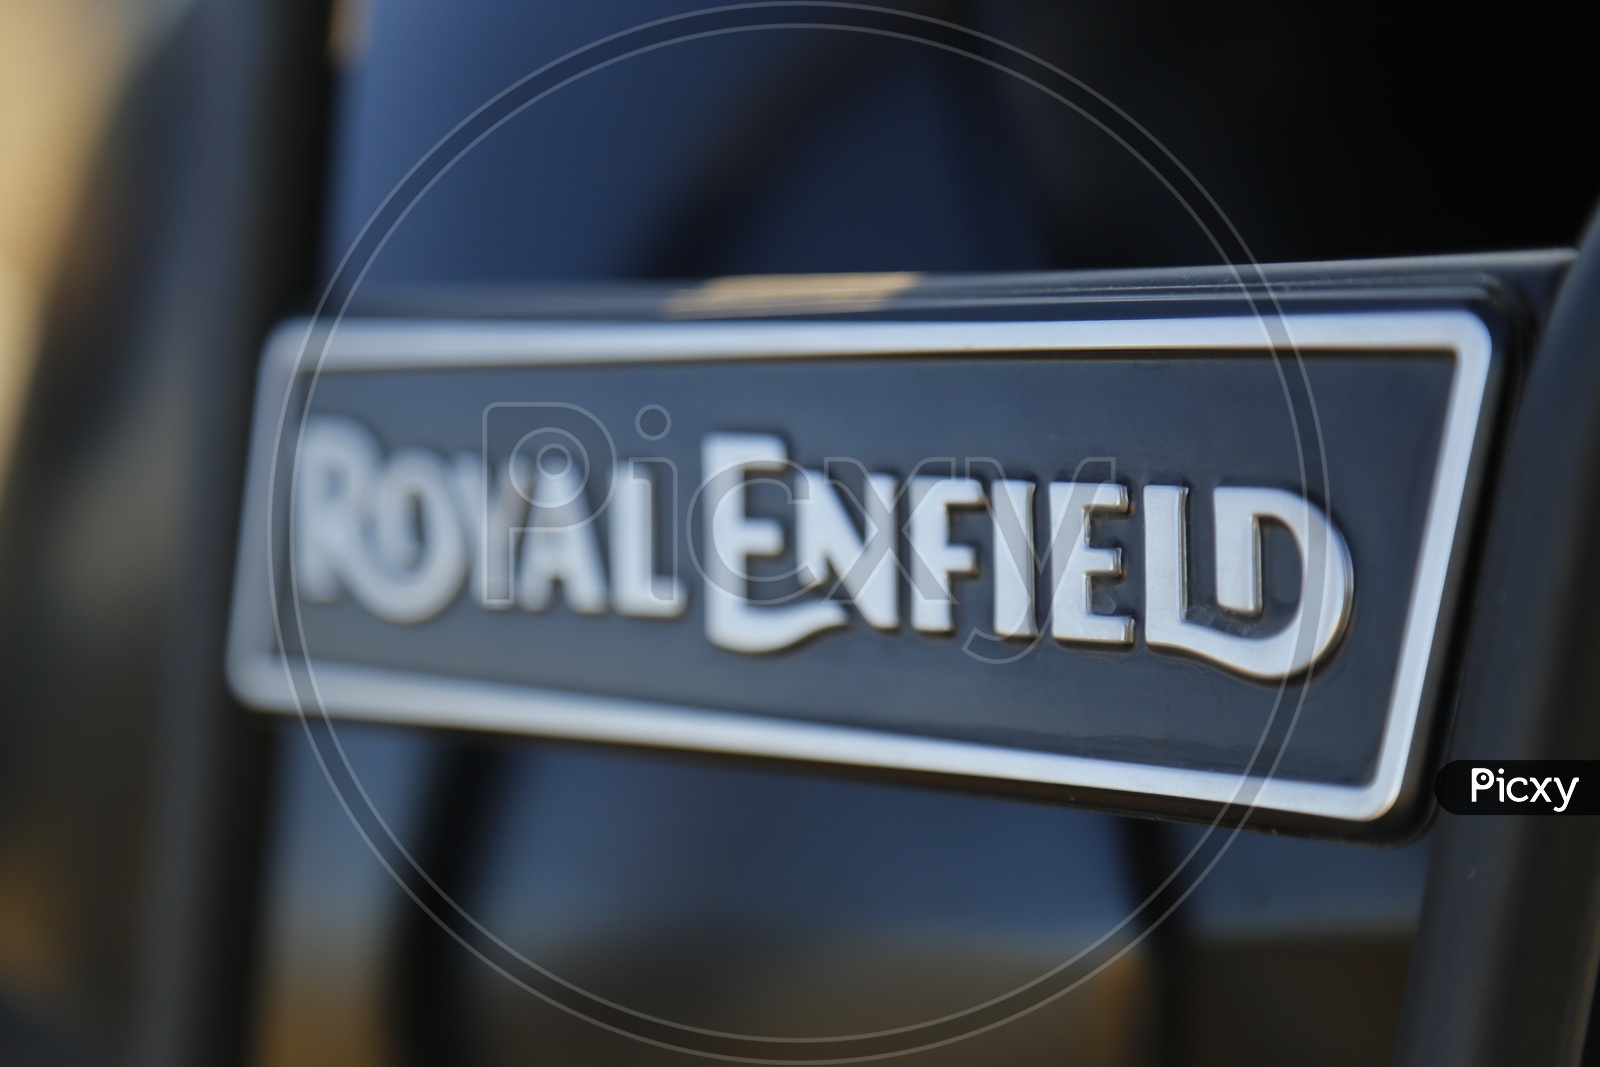 Royal Enfield secures the brand name 